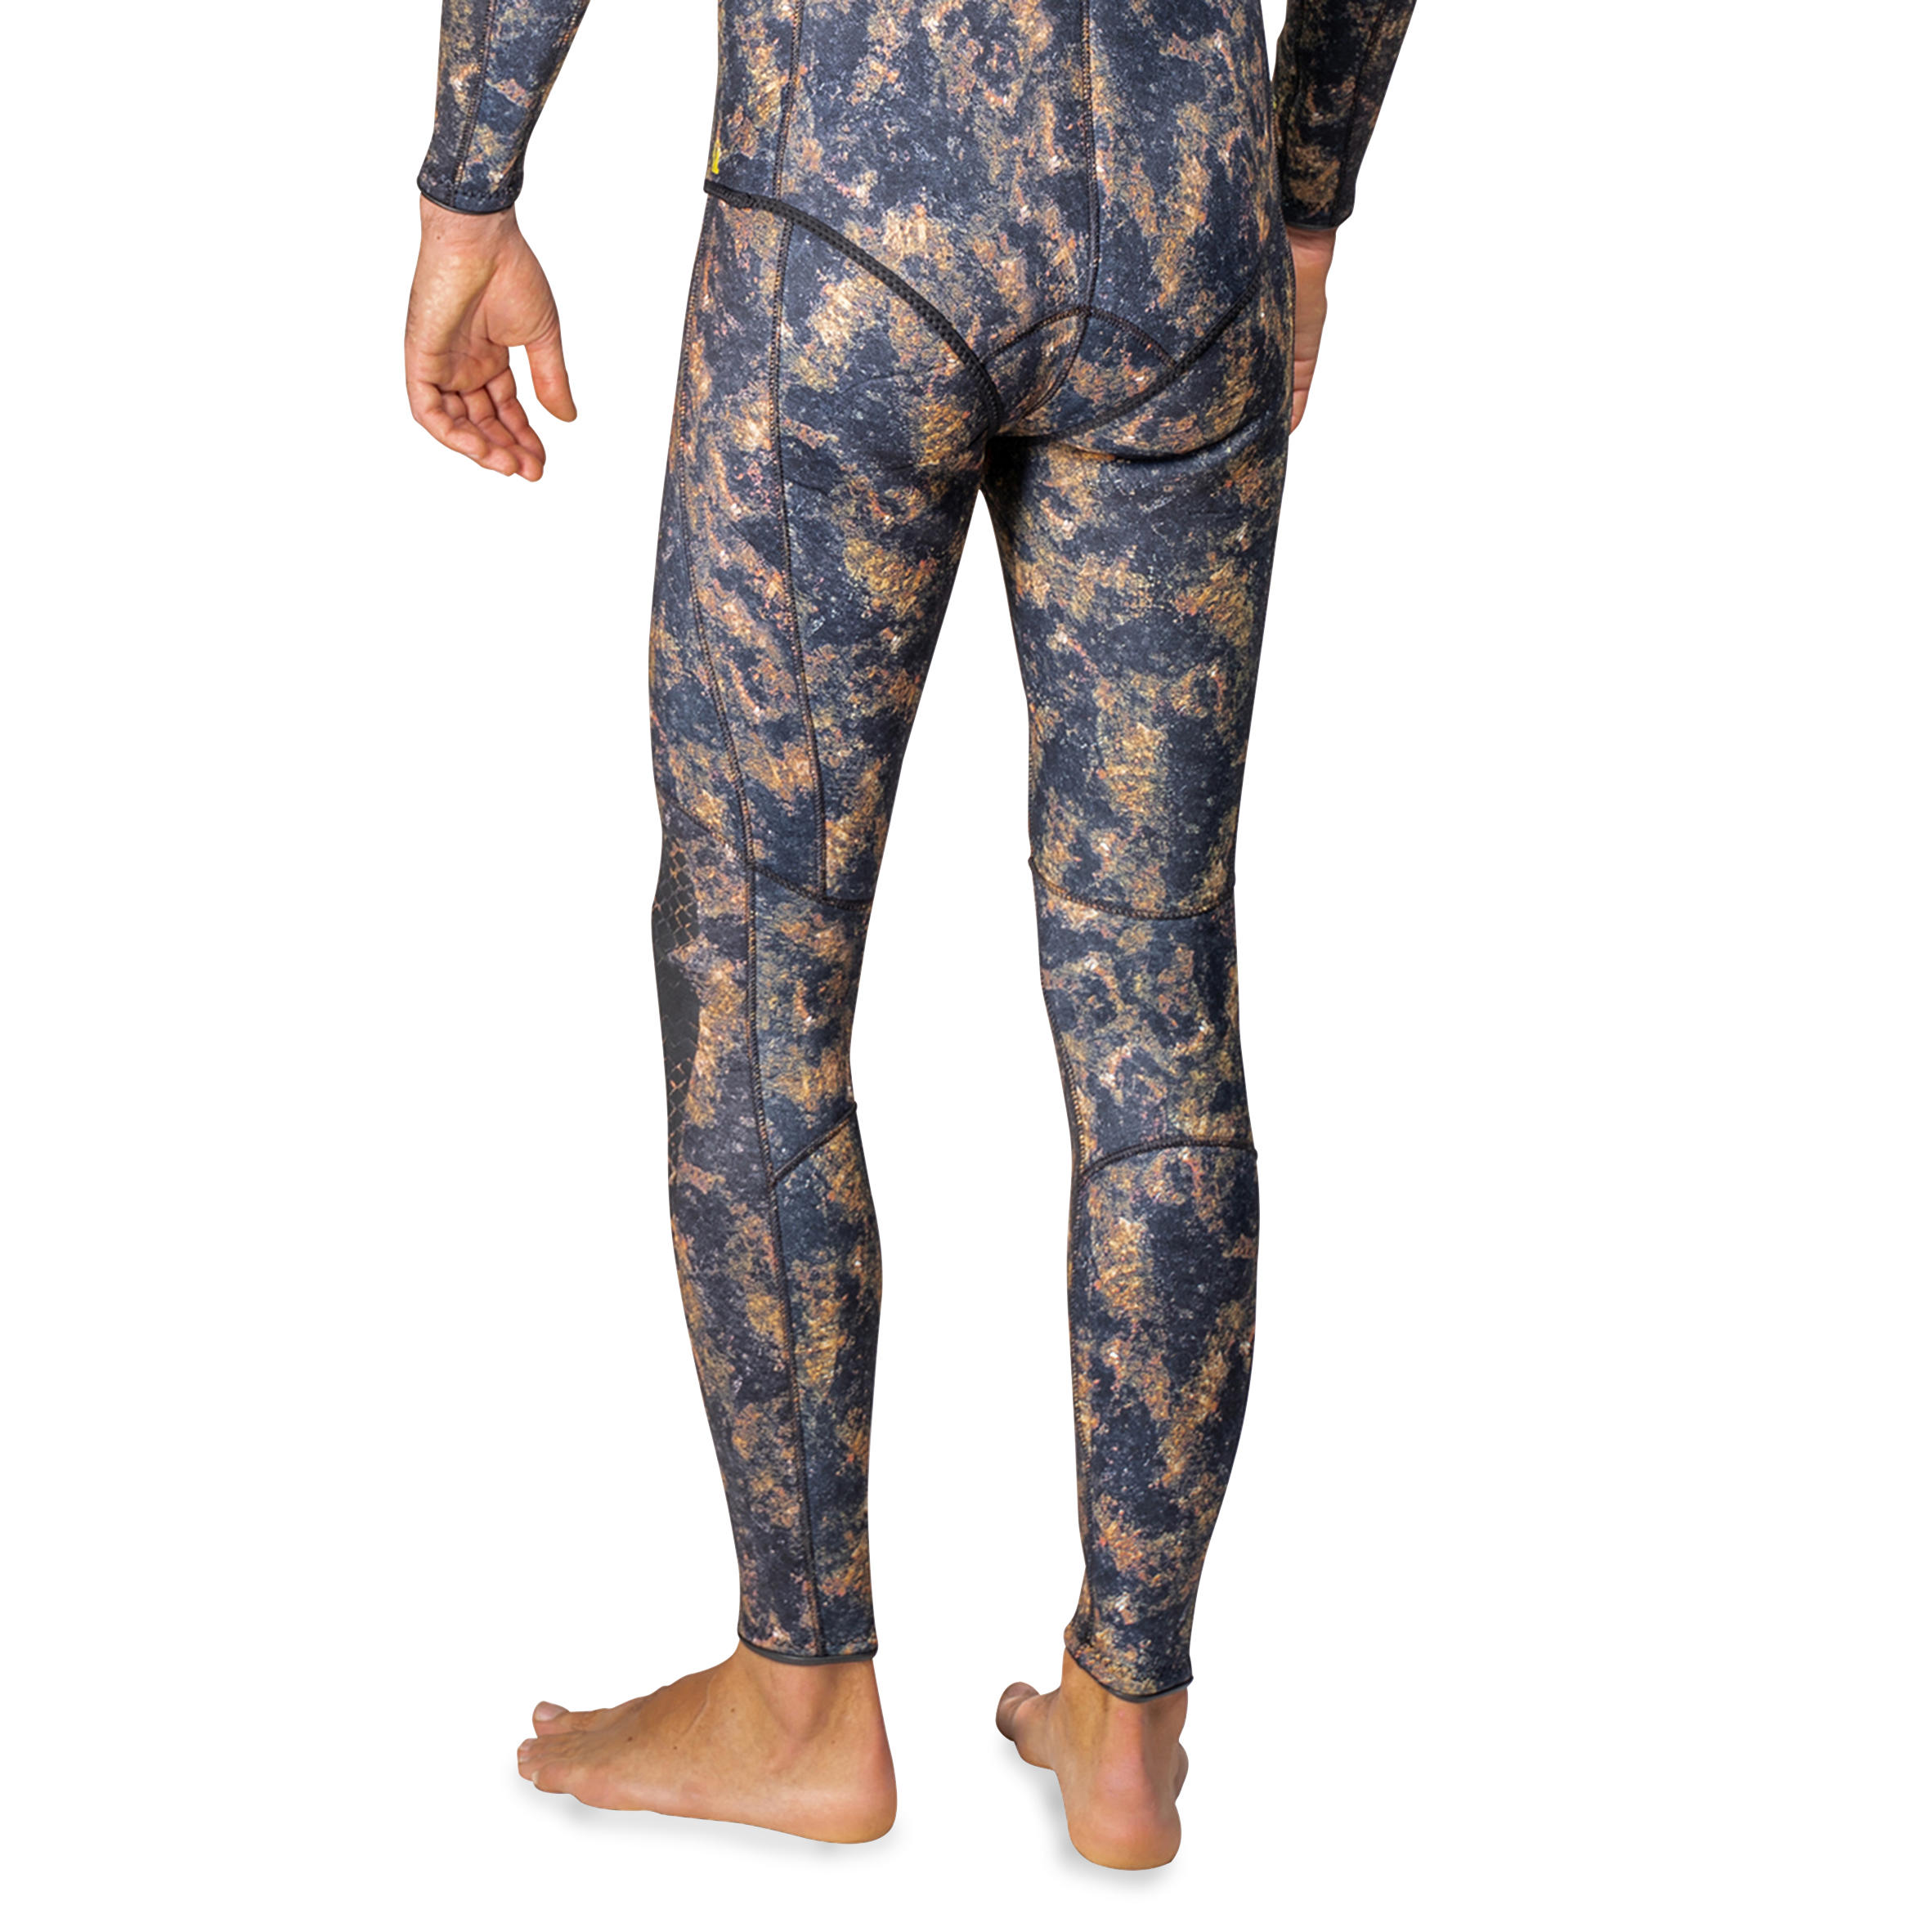 3mm split neoprene camouflage trousers for free-diving spearfishing 4/6